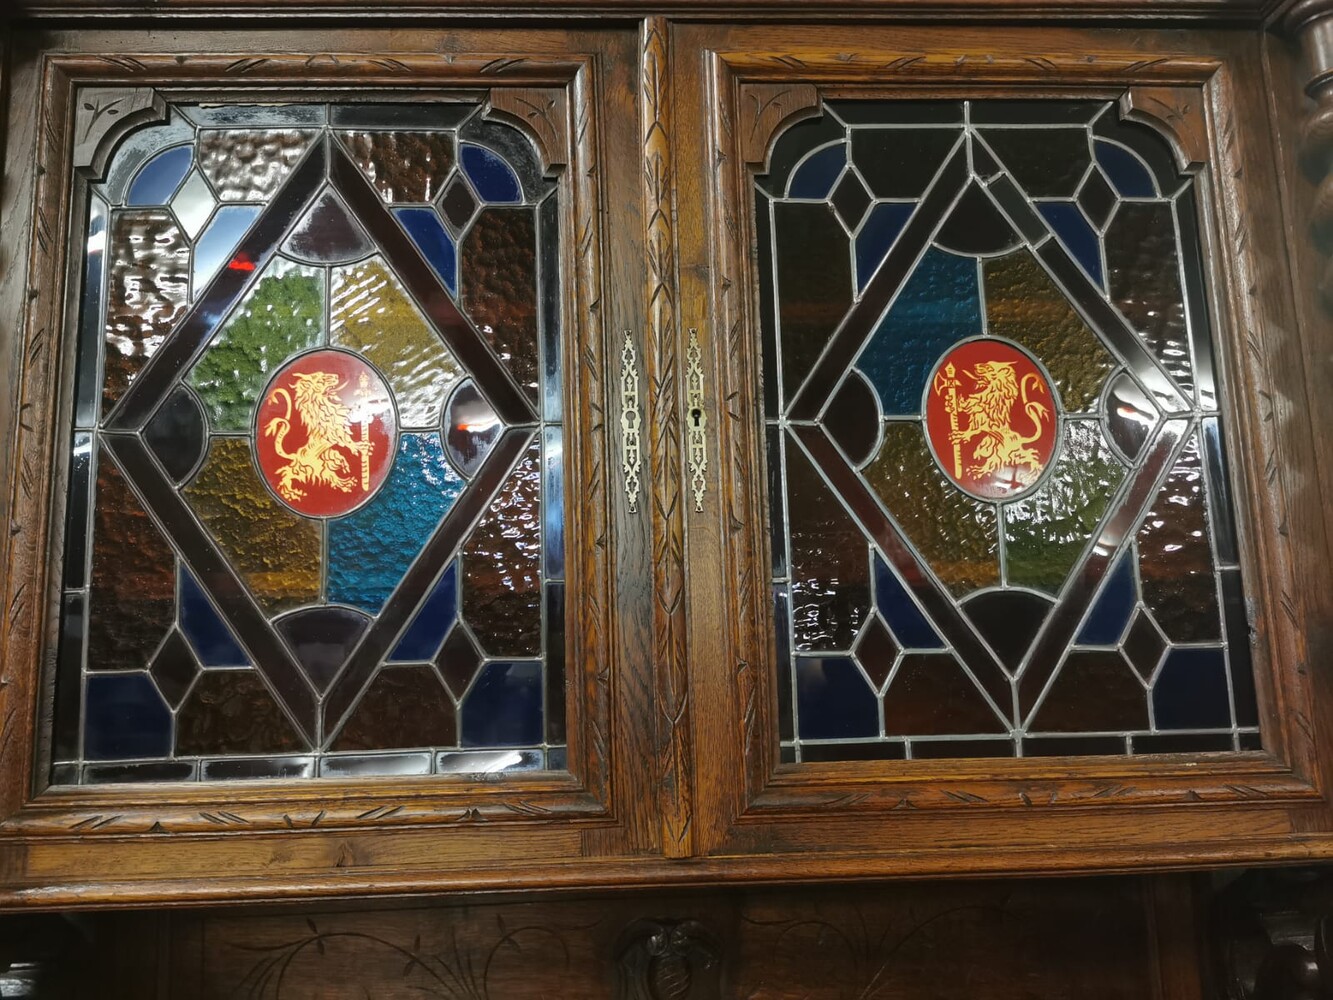  Beautiful French Hunting Cabinet with Stained Glass